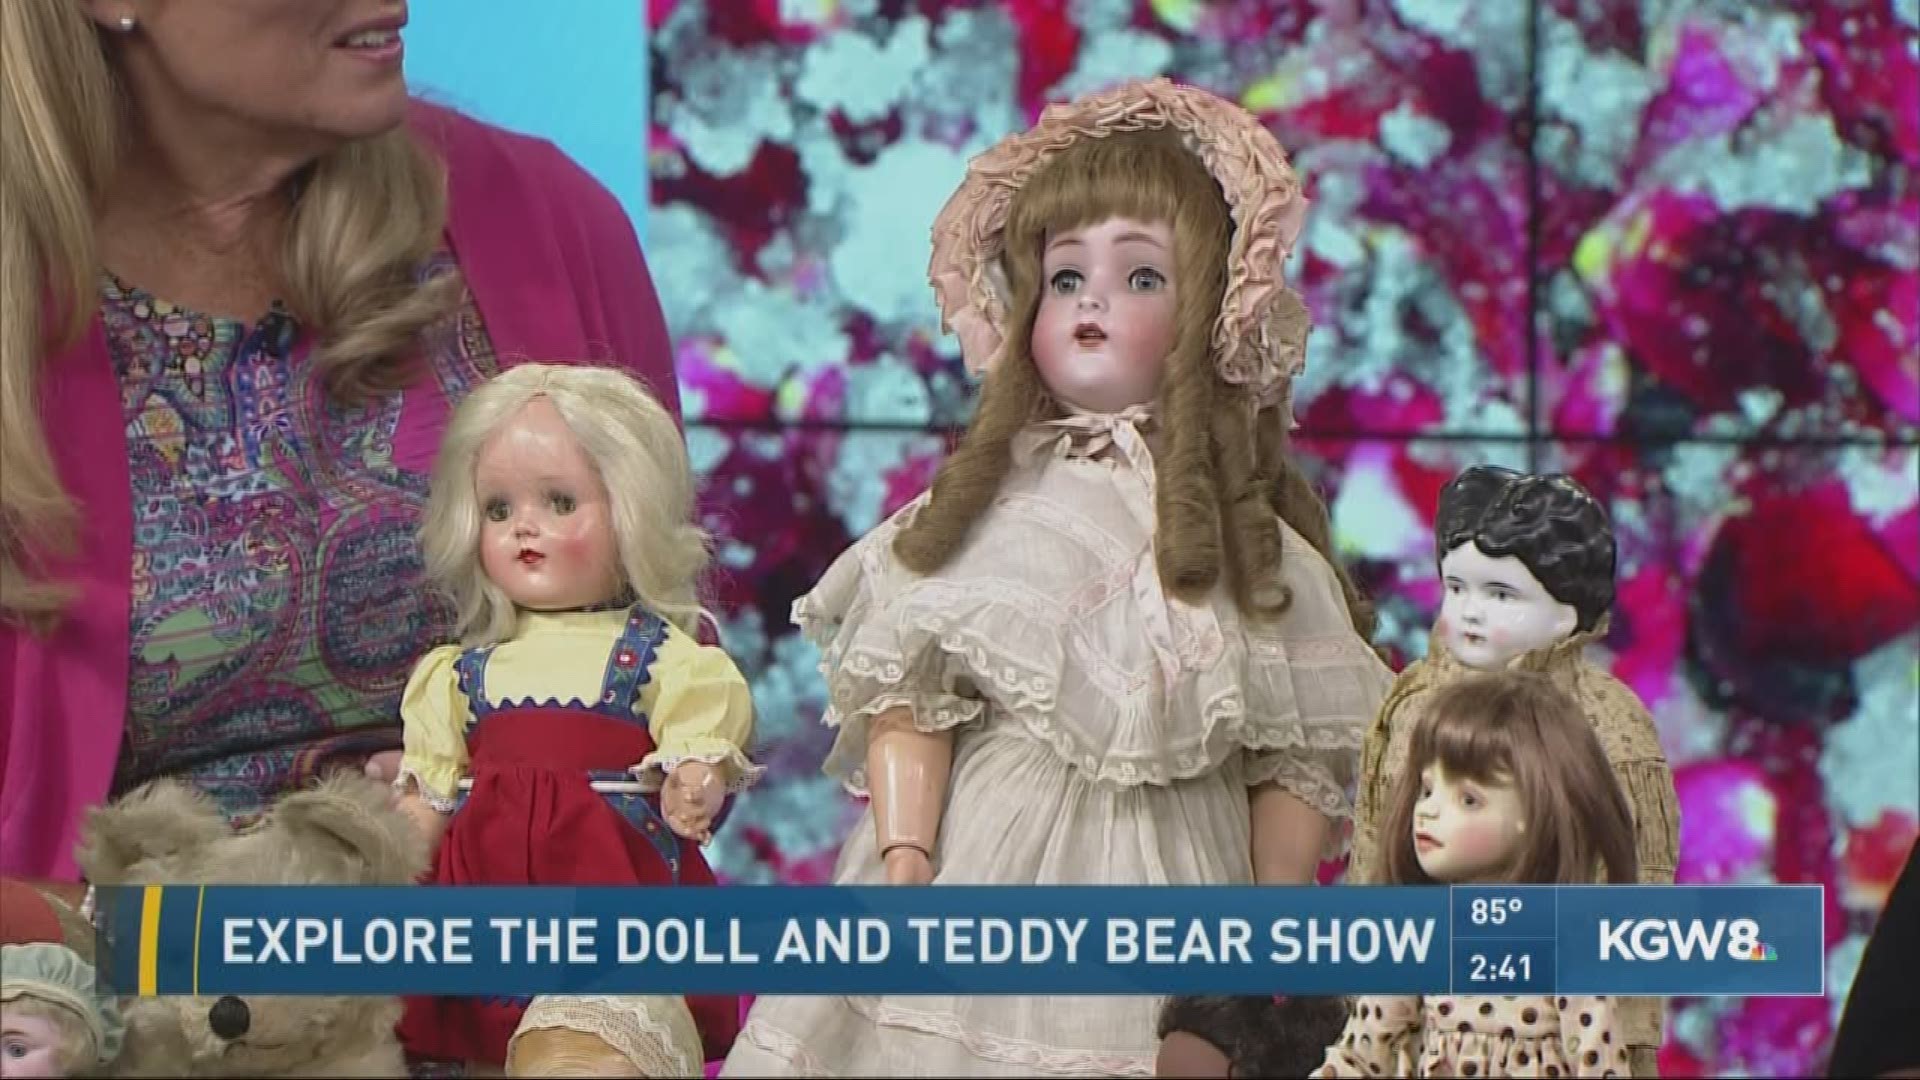 Explore the doll and teddy bear show